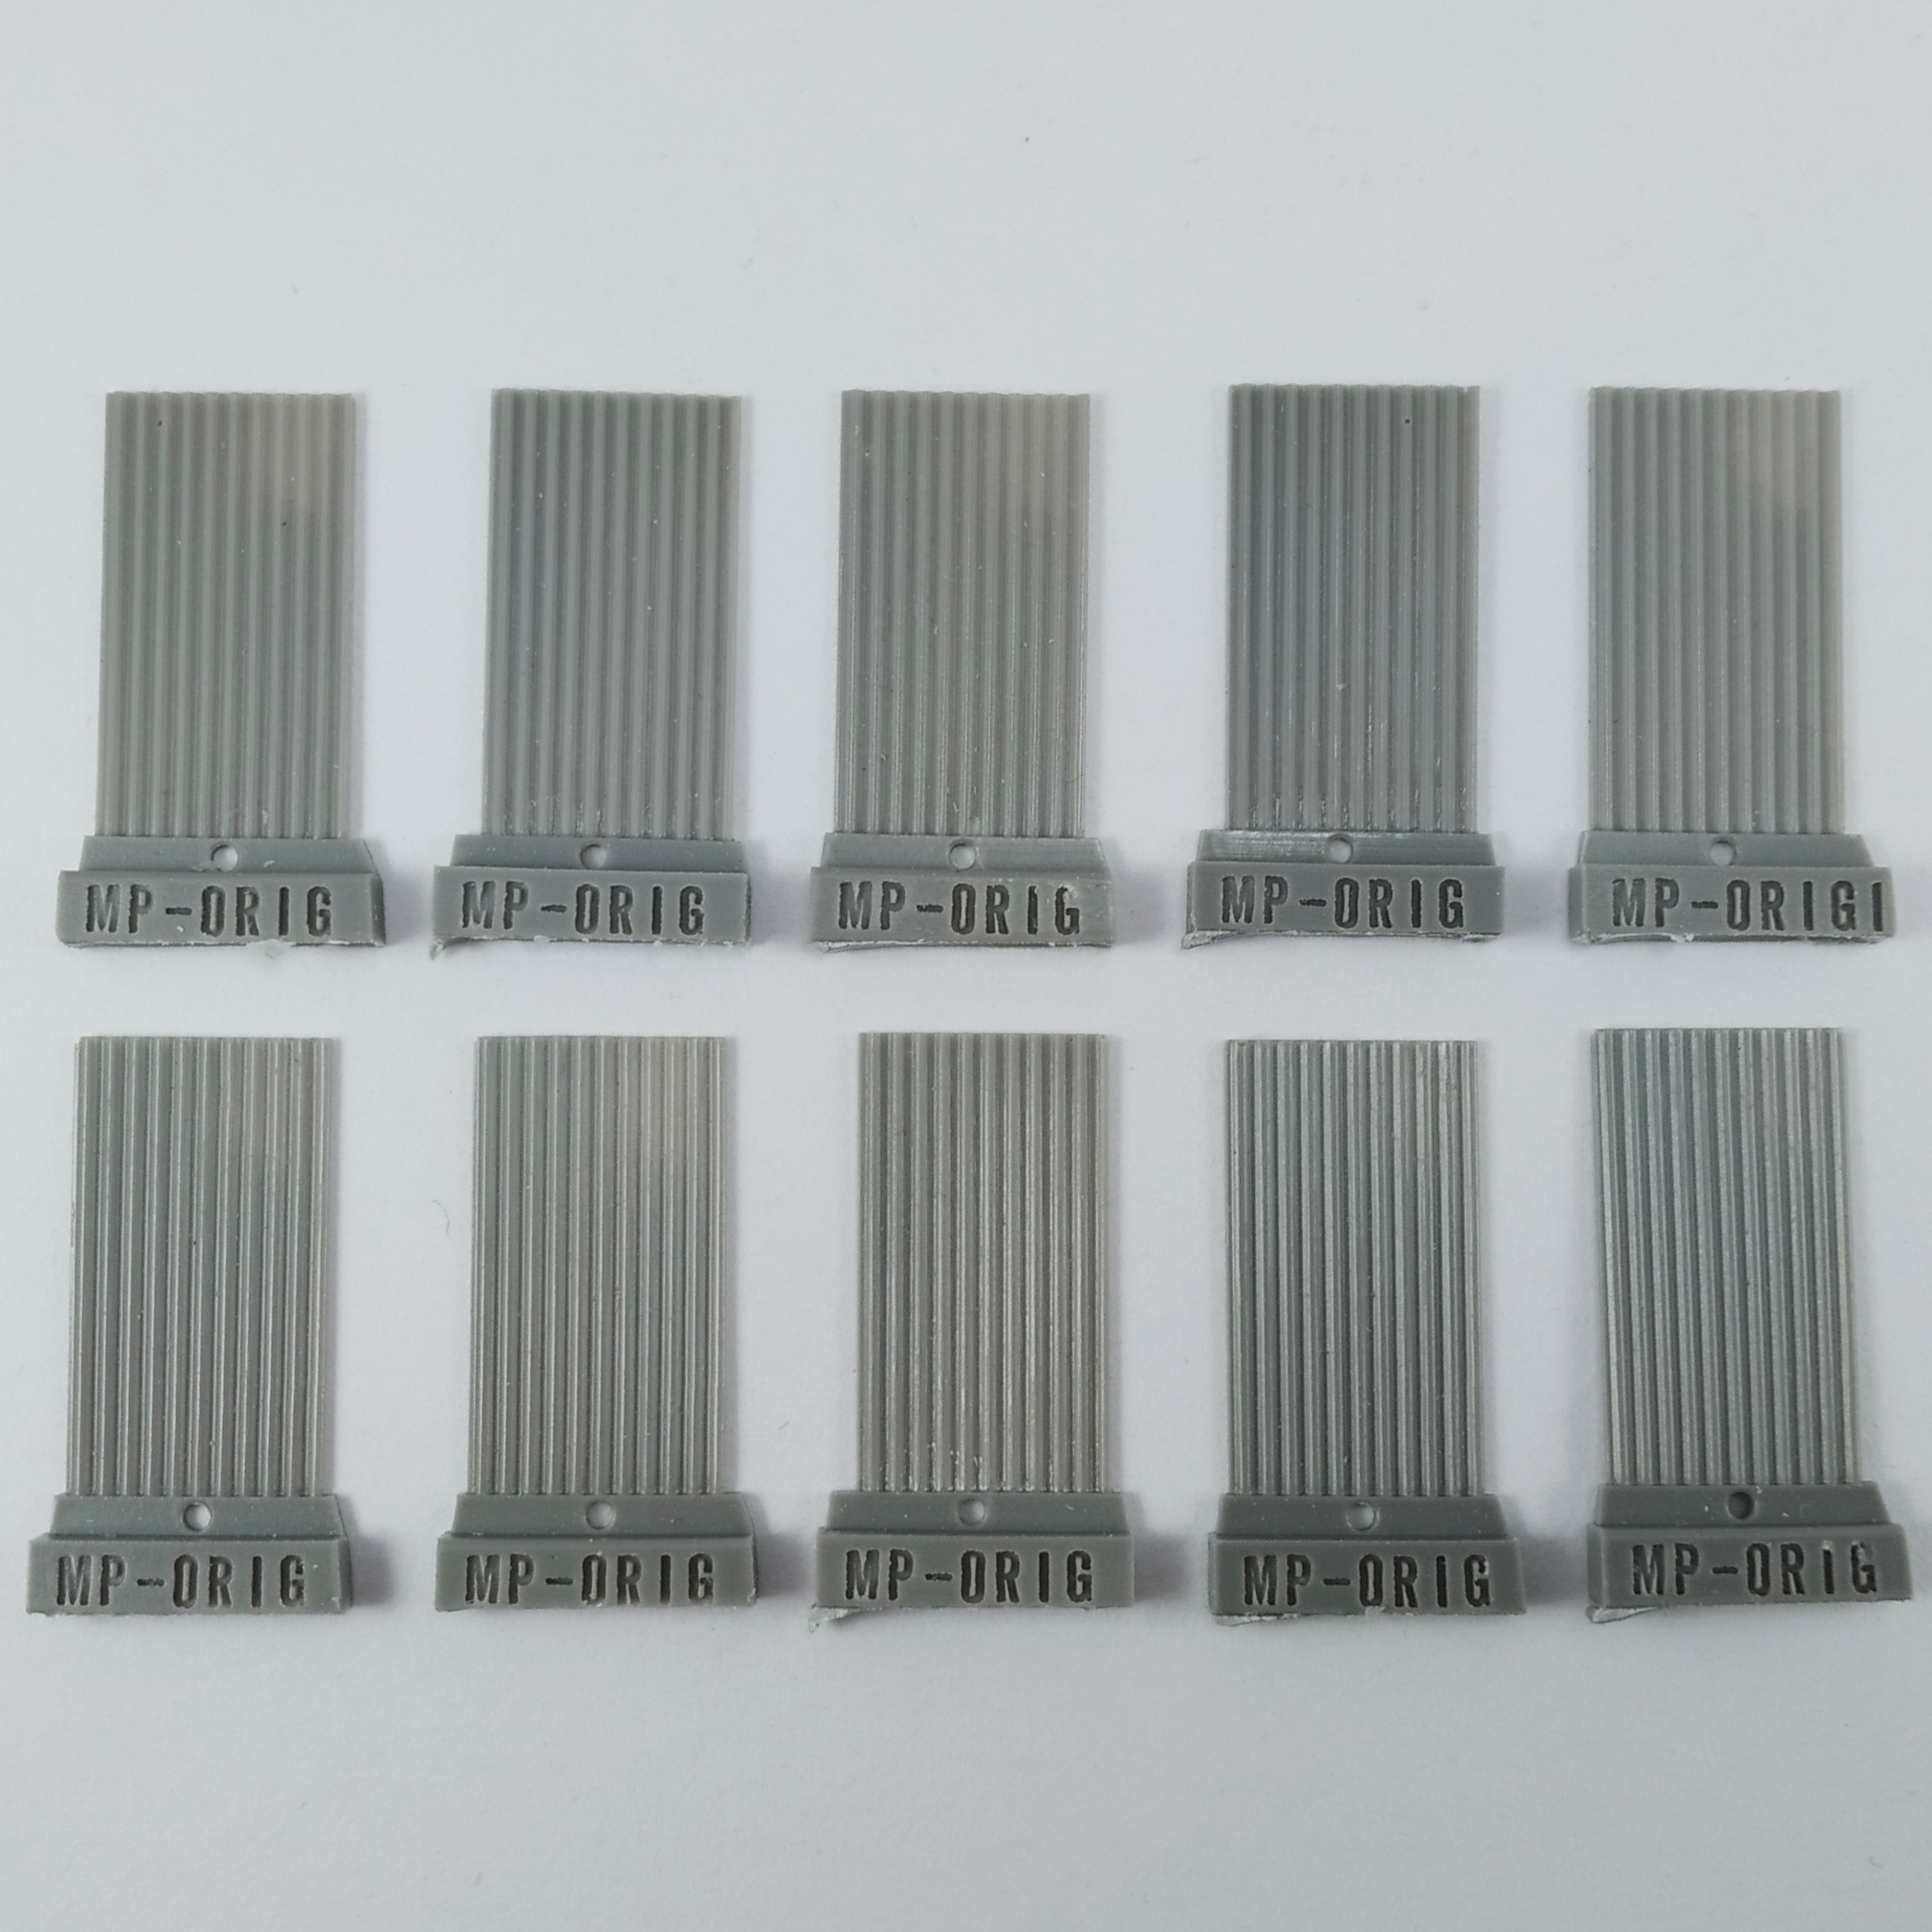 1/72 Corrugated sheets (1/72 scale)